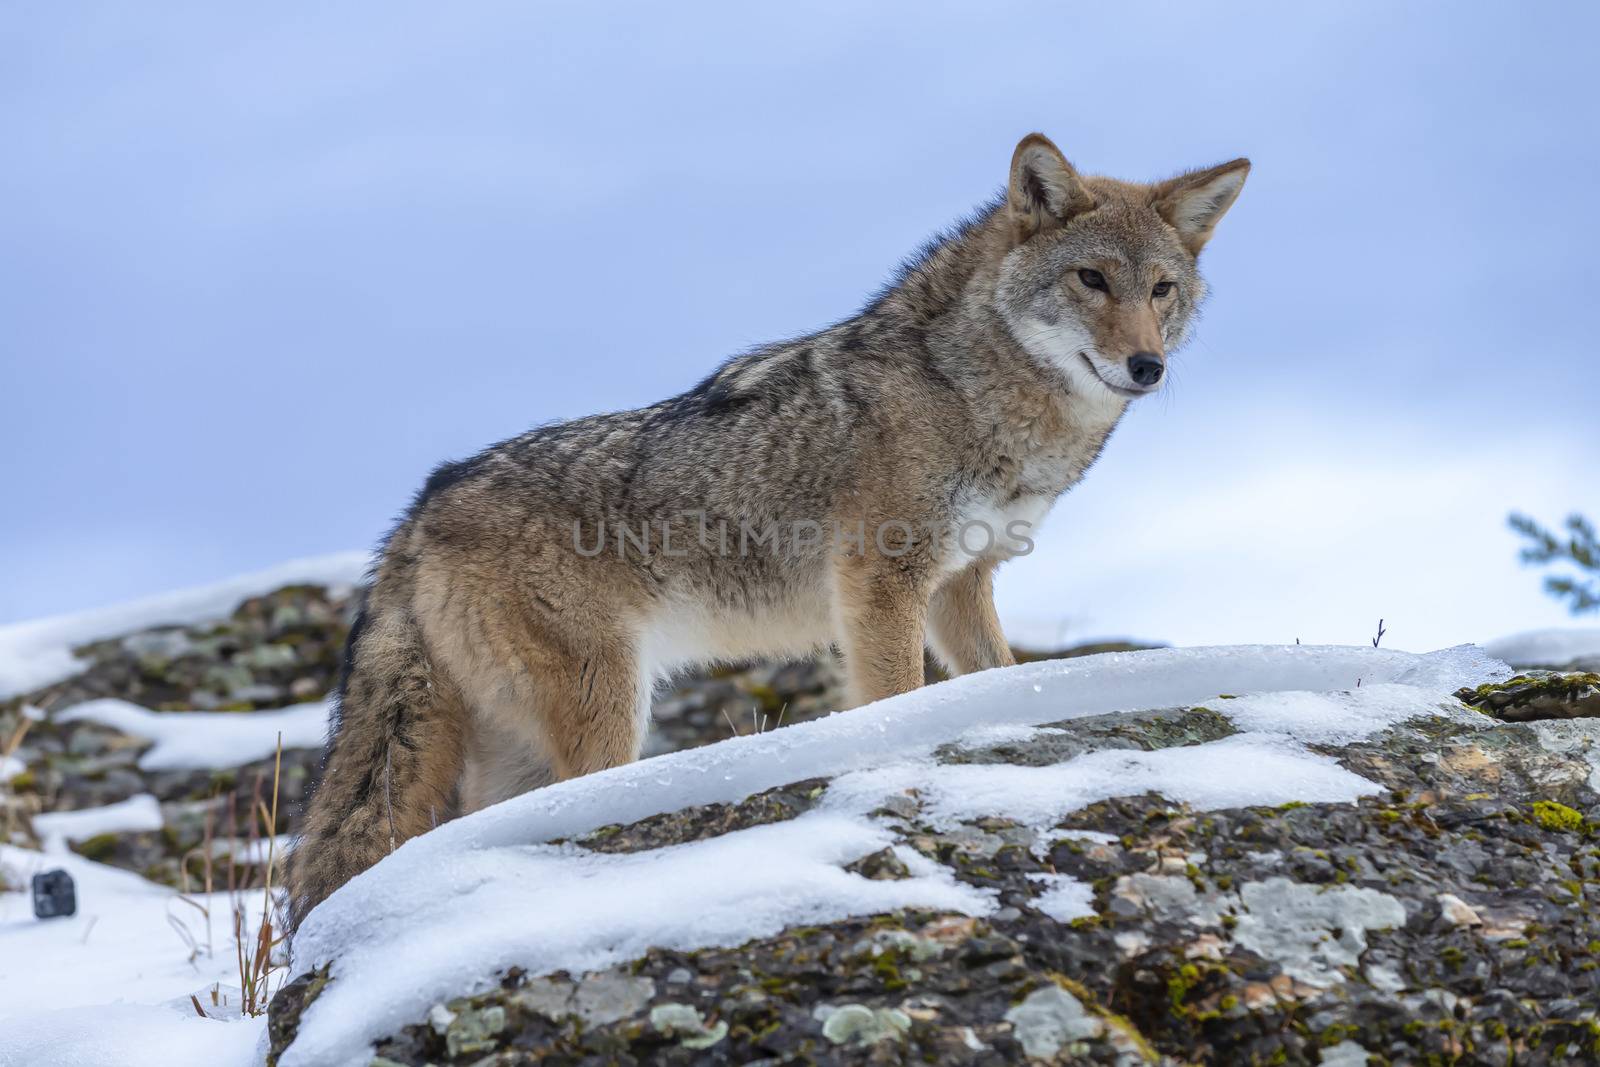 A Coyote searches for a meal in the snowy mountains of Montana.